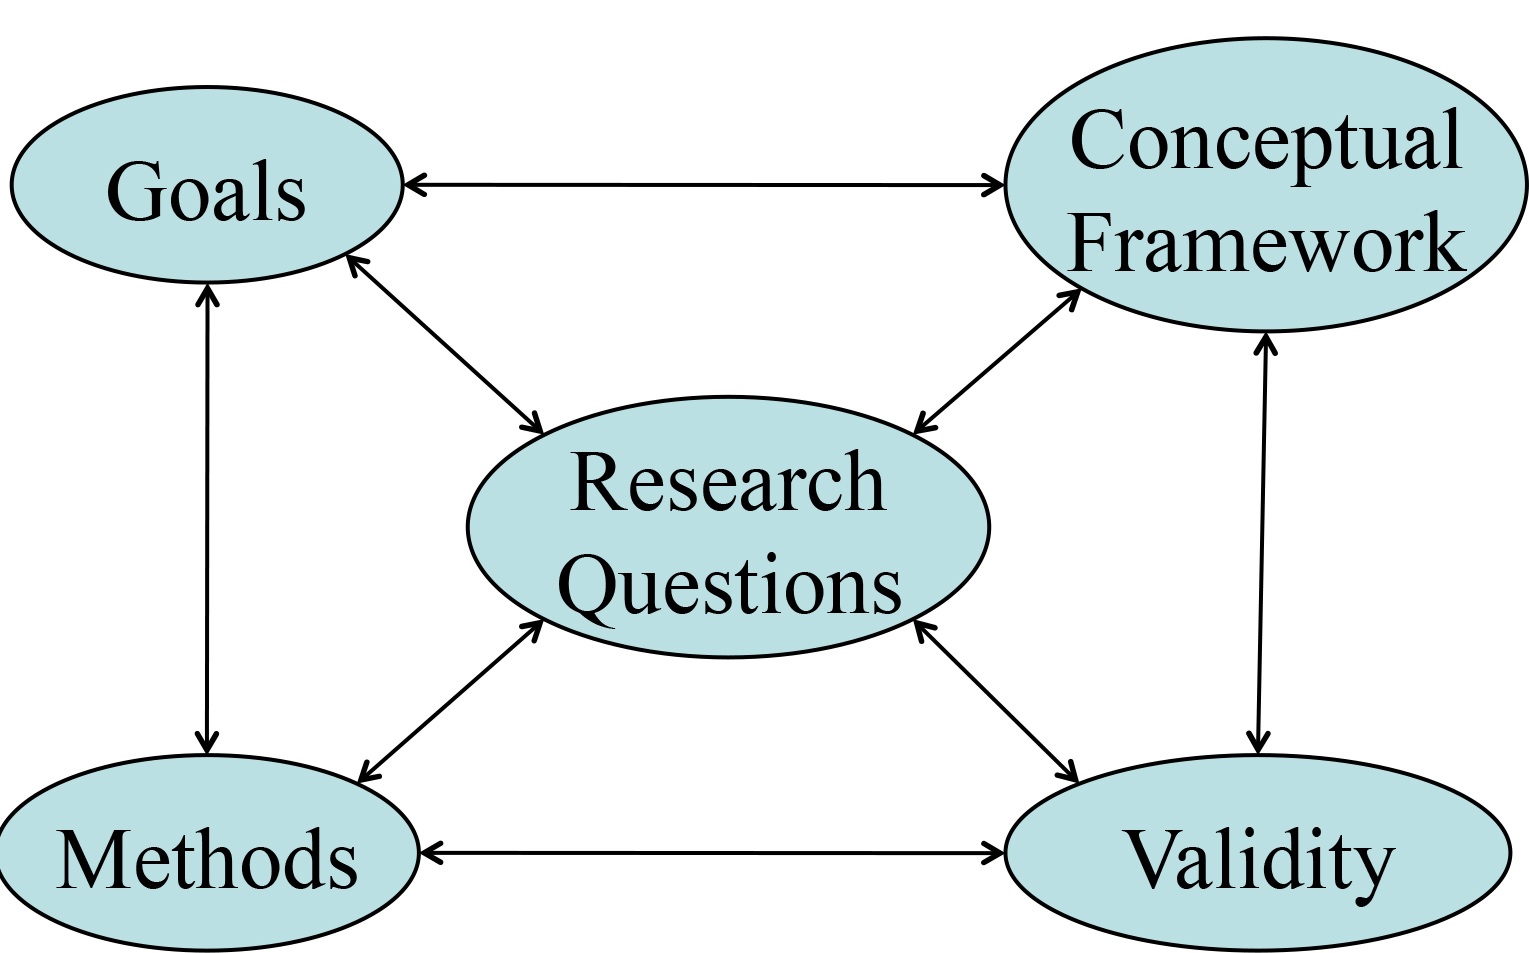 An illustration showing a systematic model of research design.